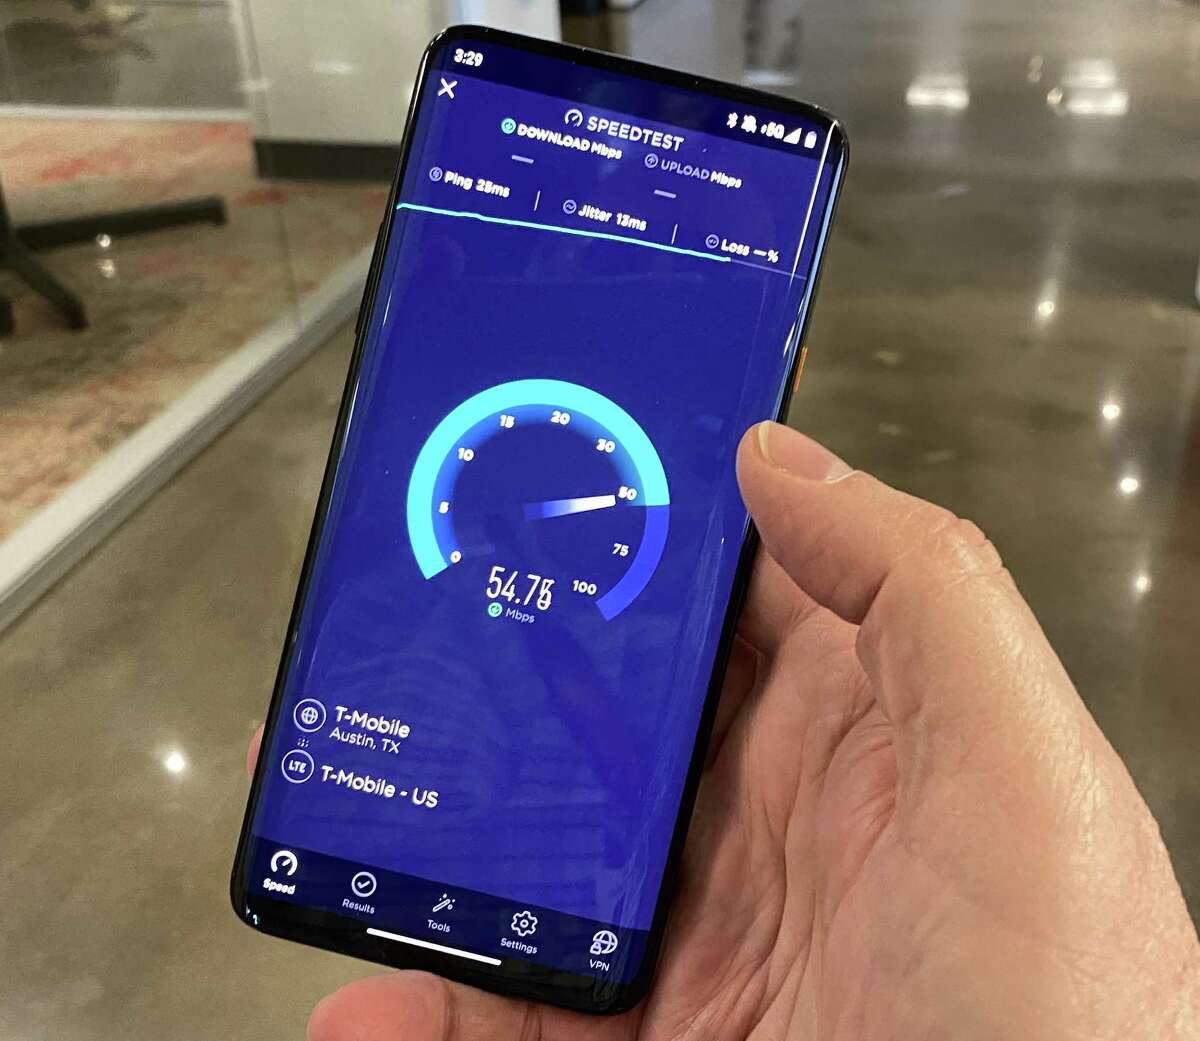 T-Mobile says its 5G speeds are about 20 percent faster than those of 4G LTE. But the carrier is in the process of integrating Sprint’s faster 5G network, and future phones will have zippier speeds.